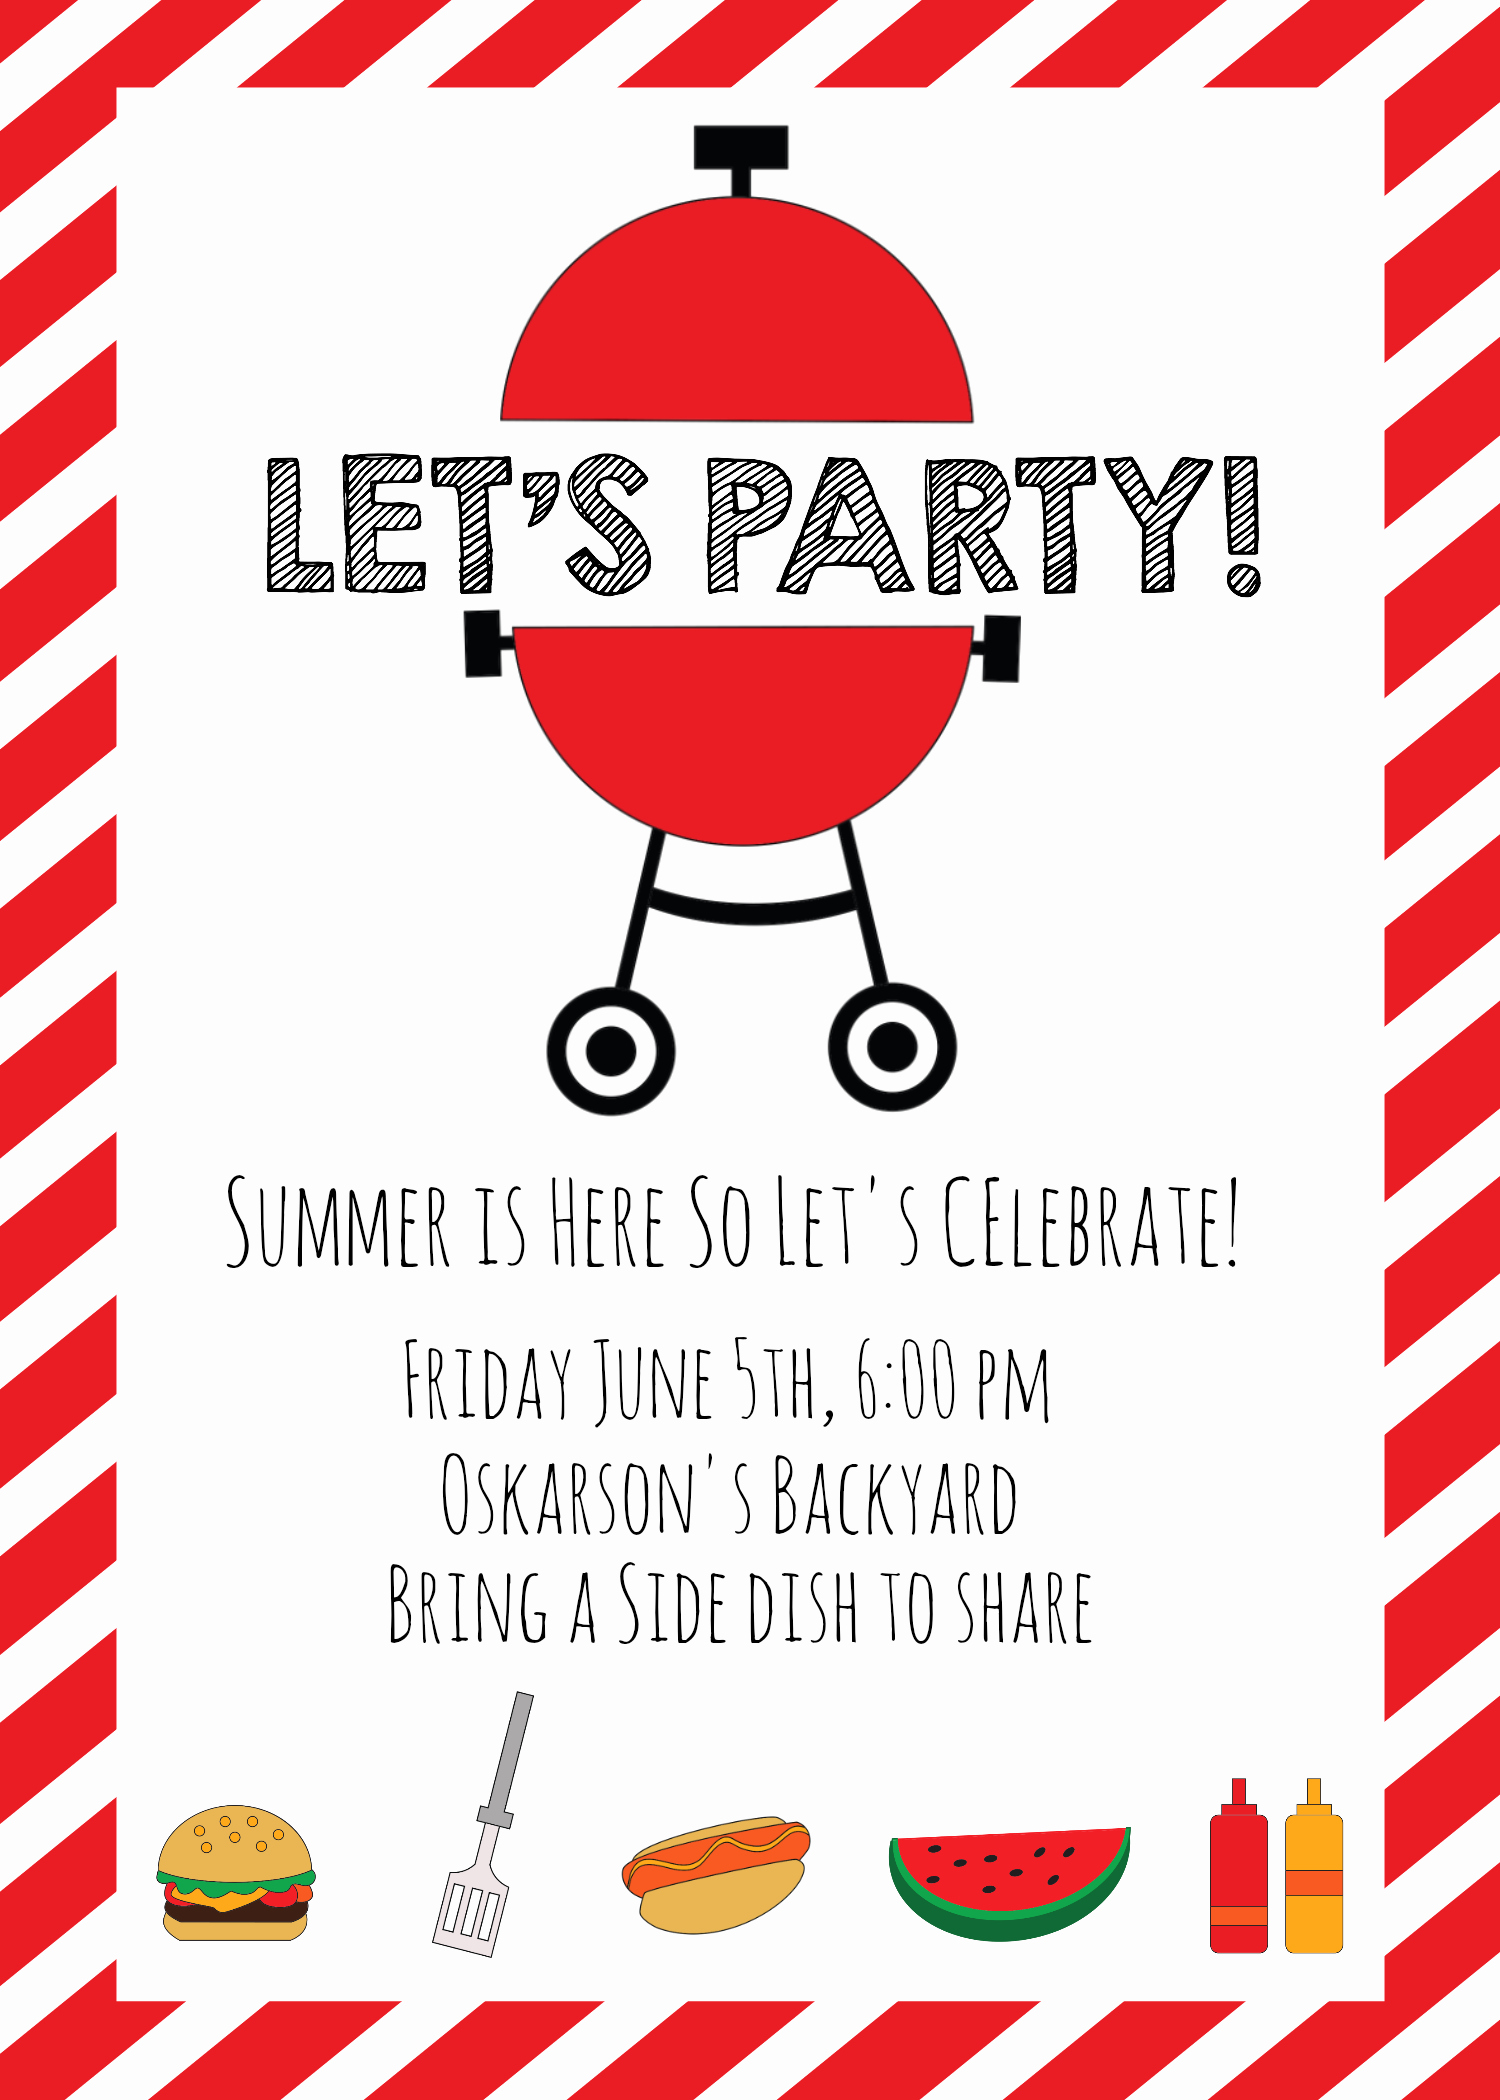 Free Downloadable Bbq Invitation Template Lovely Summer Bbq Invitations and Ideas